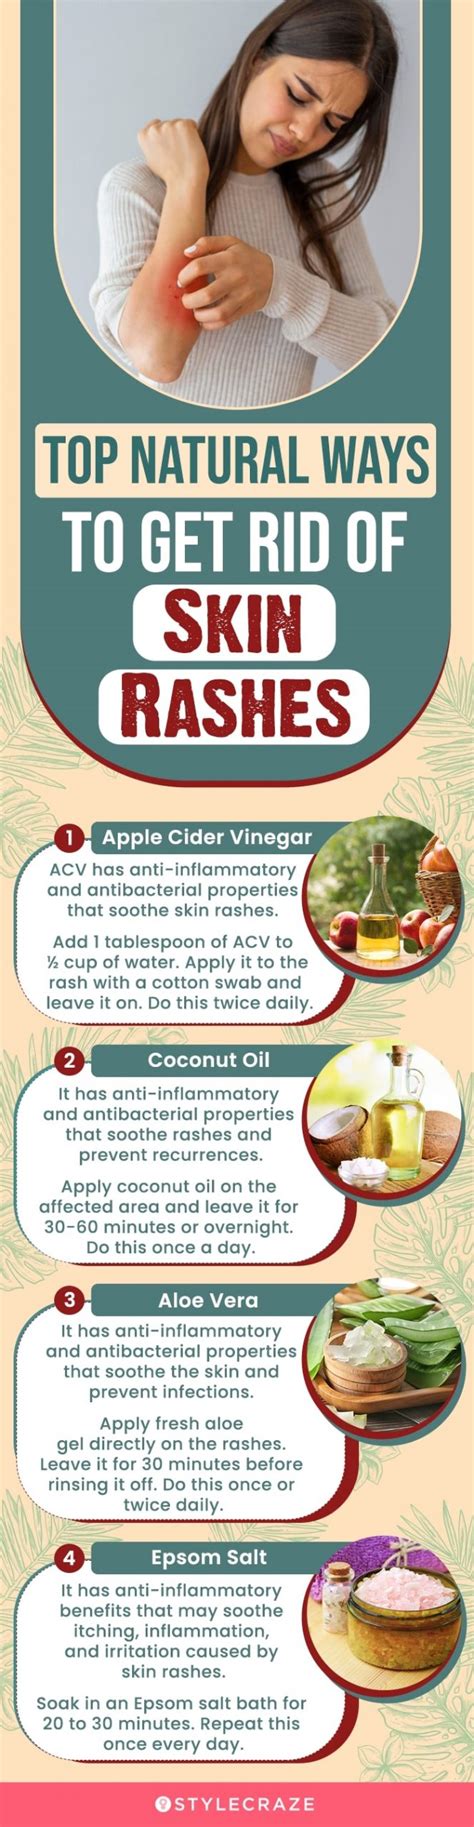 21 Home Remedies To Get Rid Of Rashes On The Face Diet And Prevention